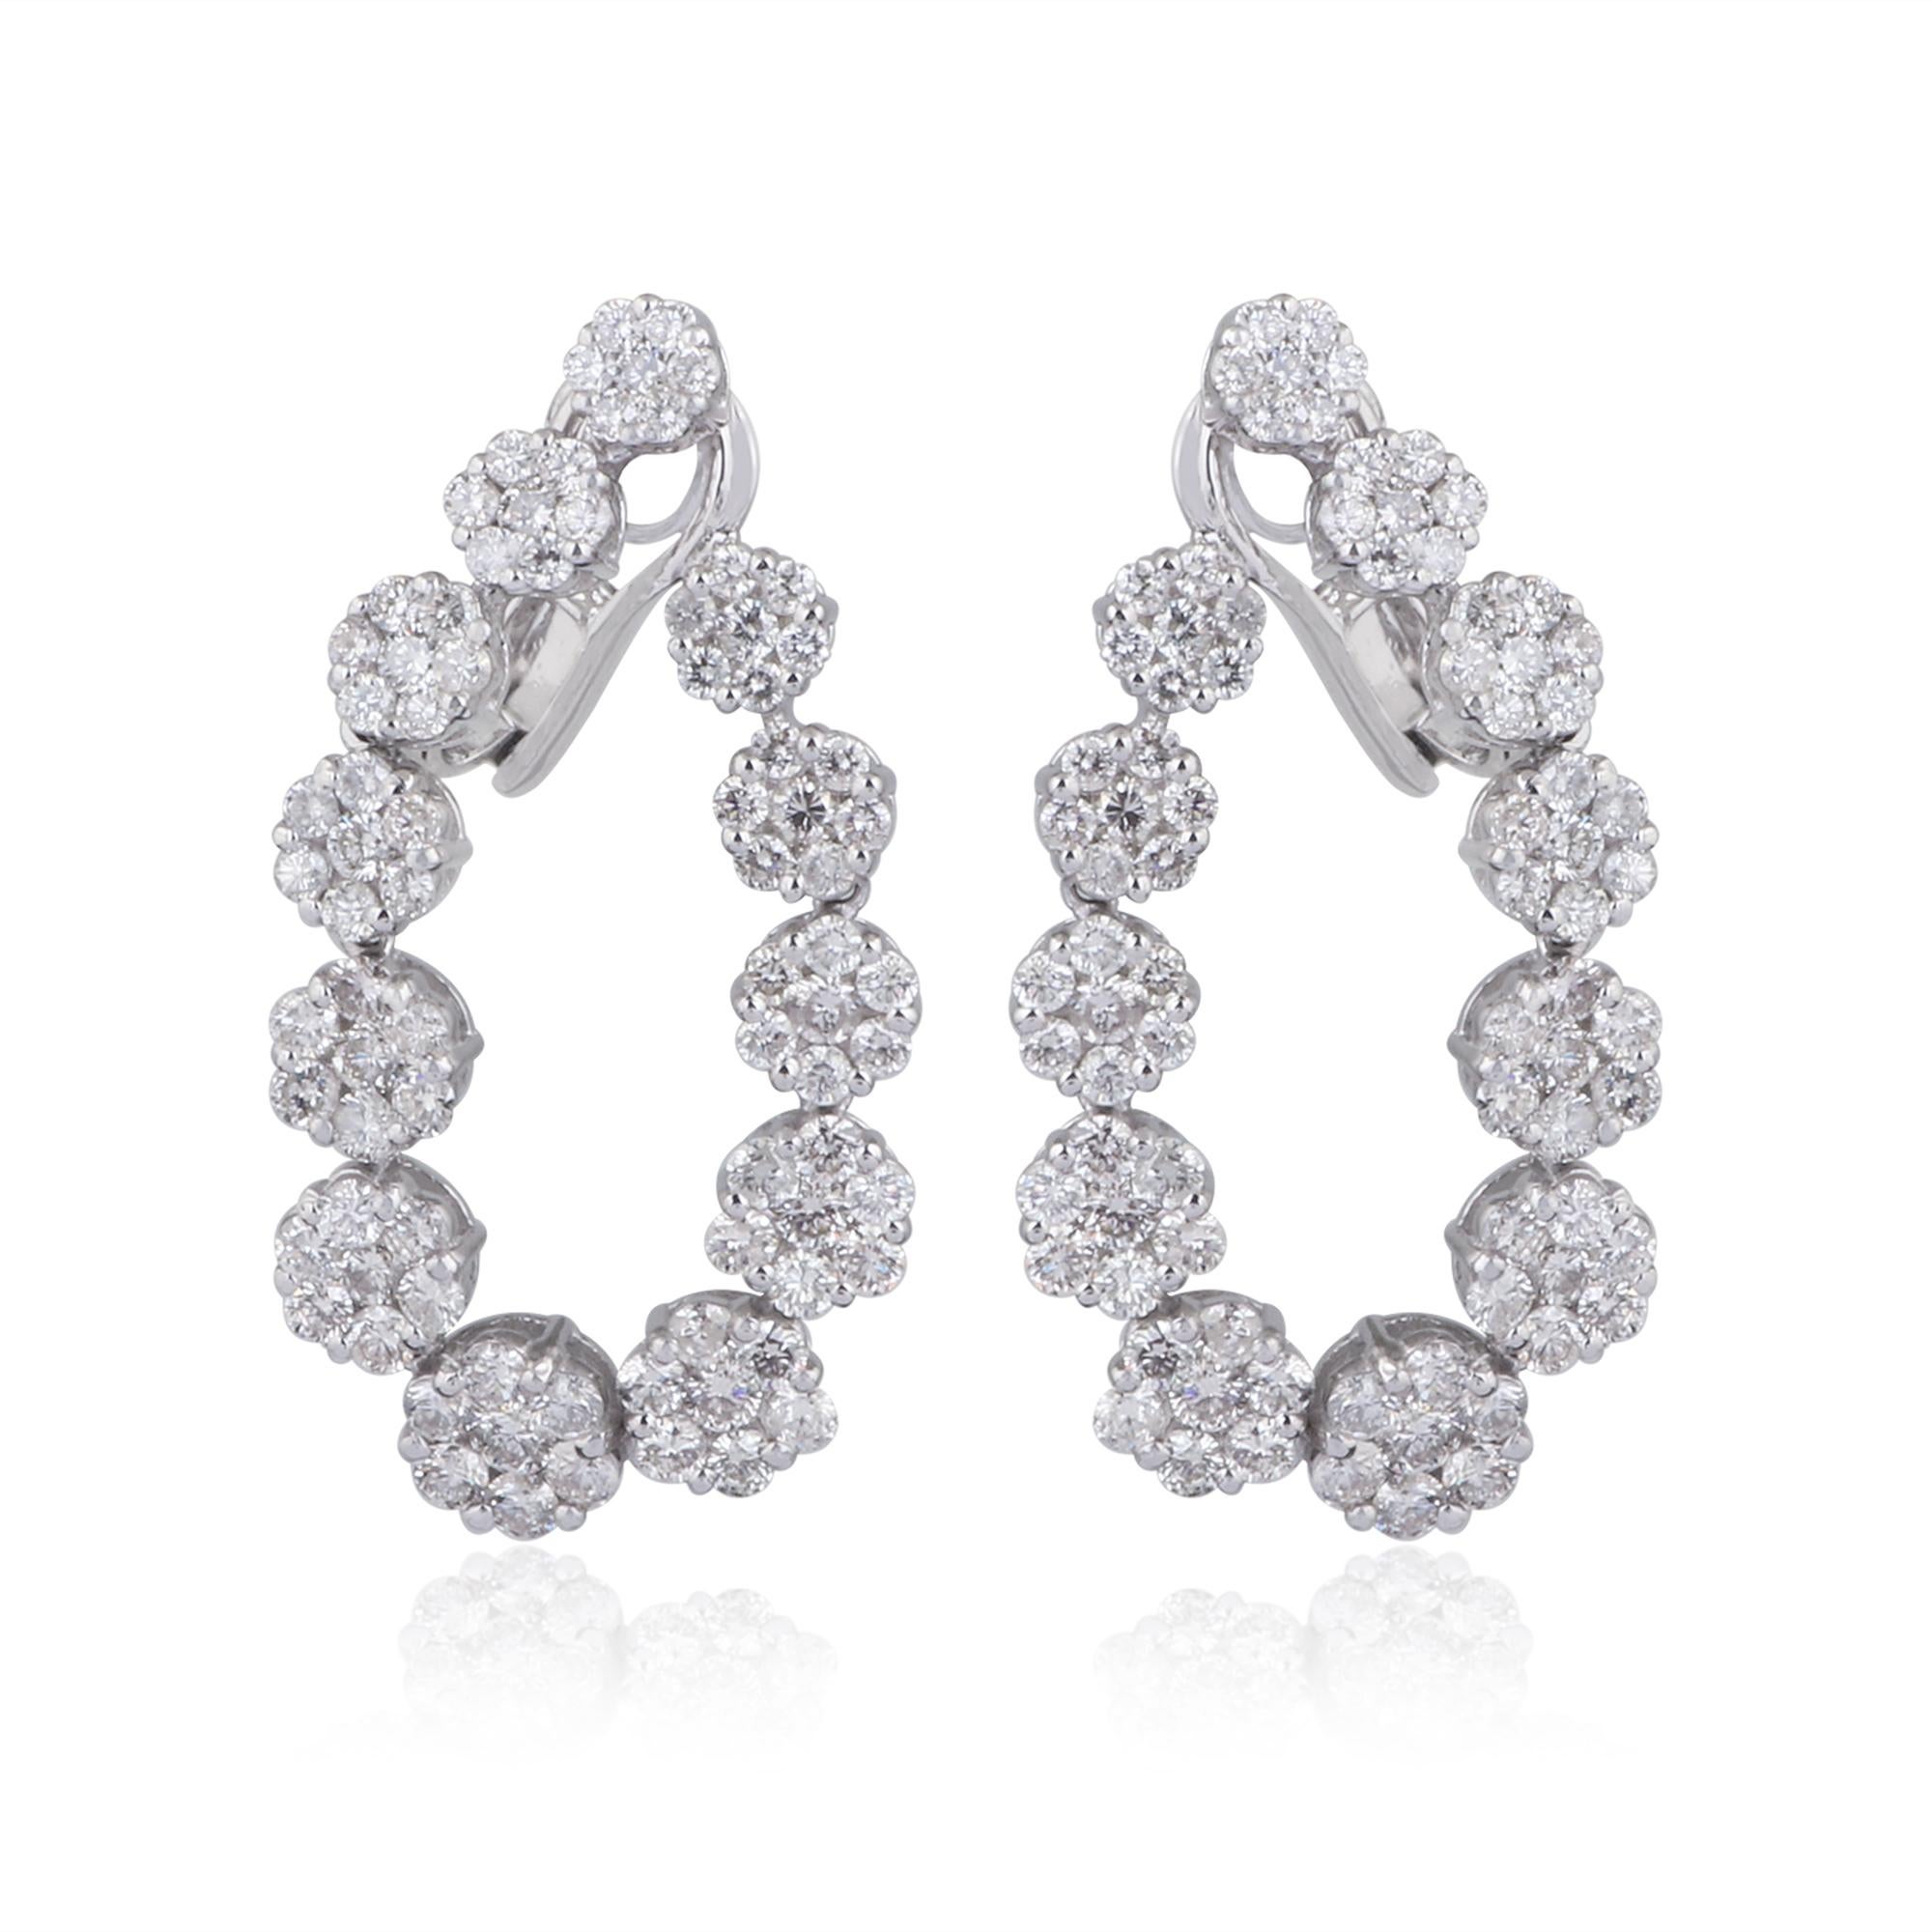 Round Cut 5.20 Carat Diamond Pave Lever Back Earrings 14 Karat White Gold Fine Jewelry For Sale